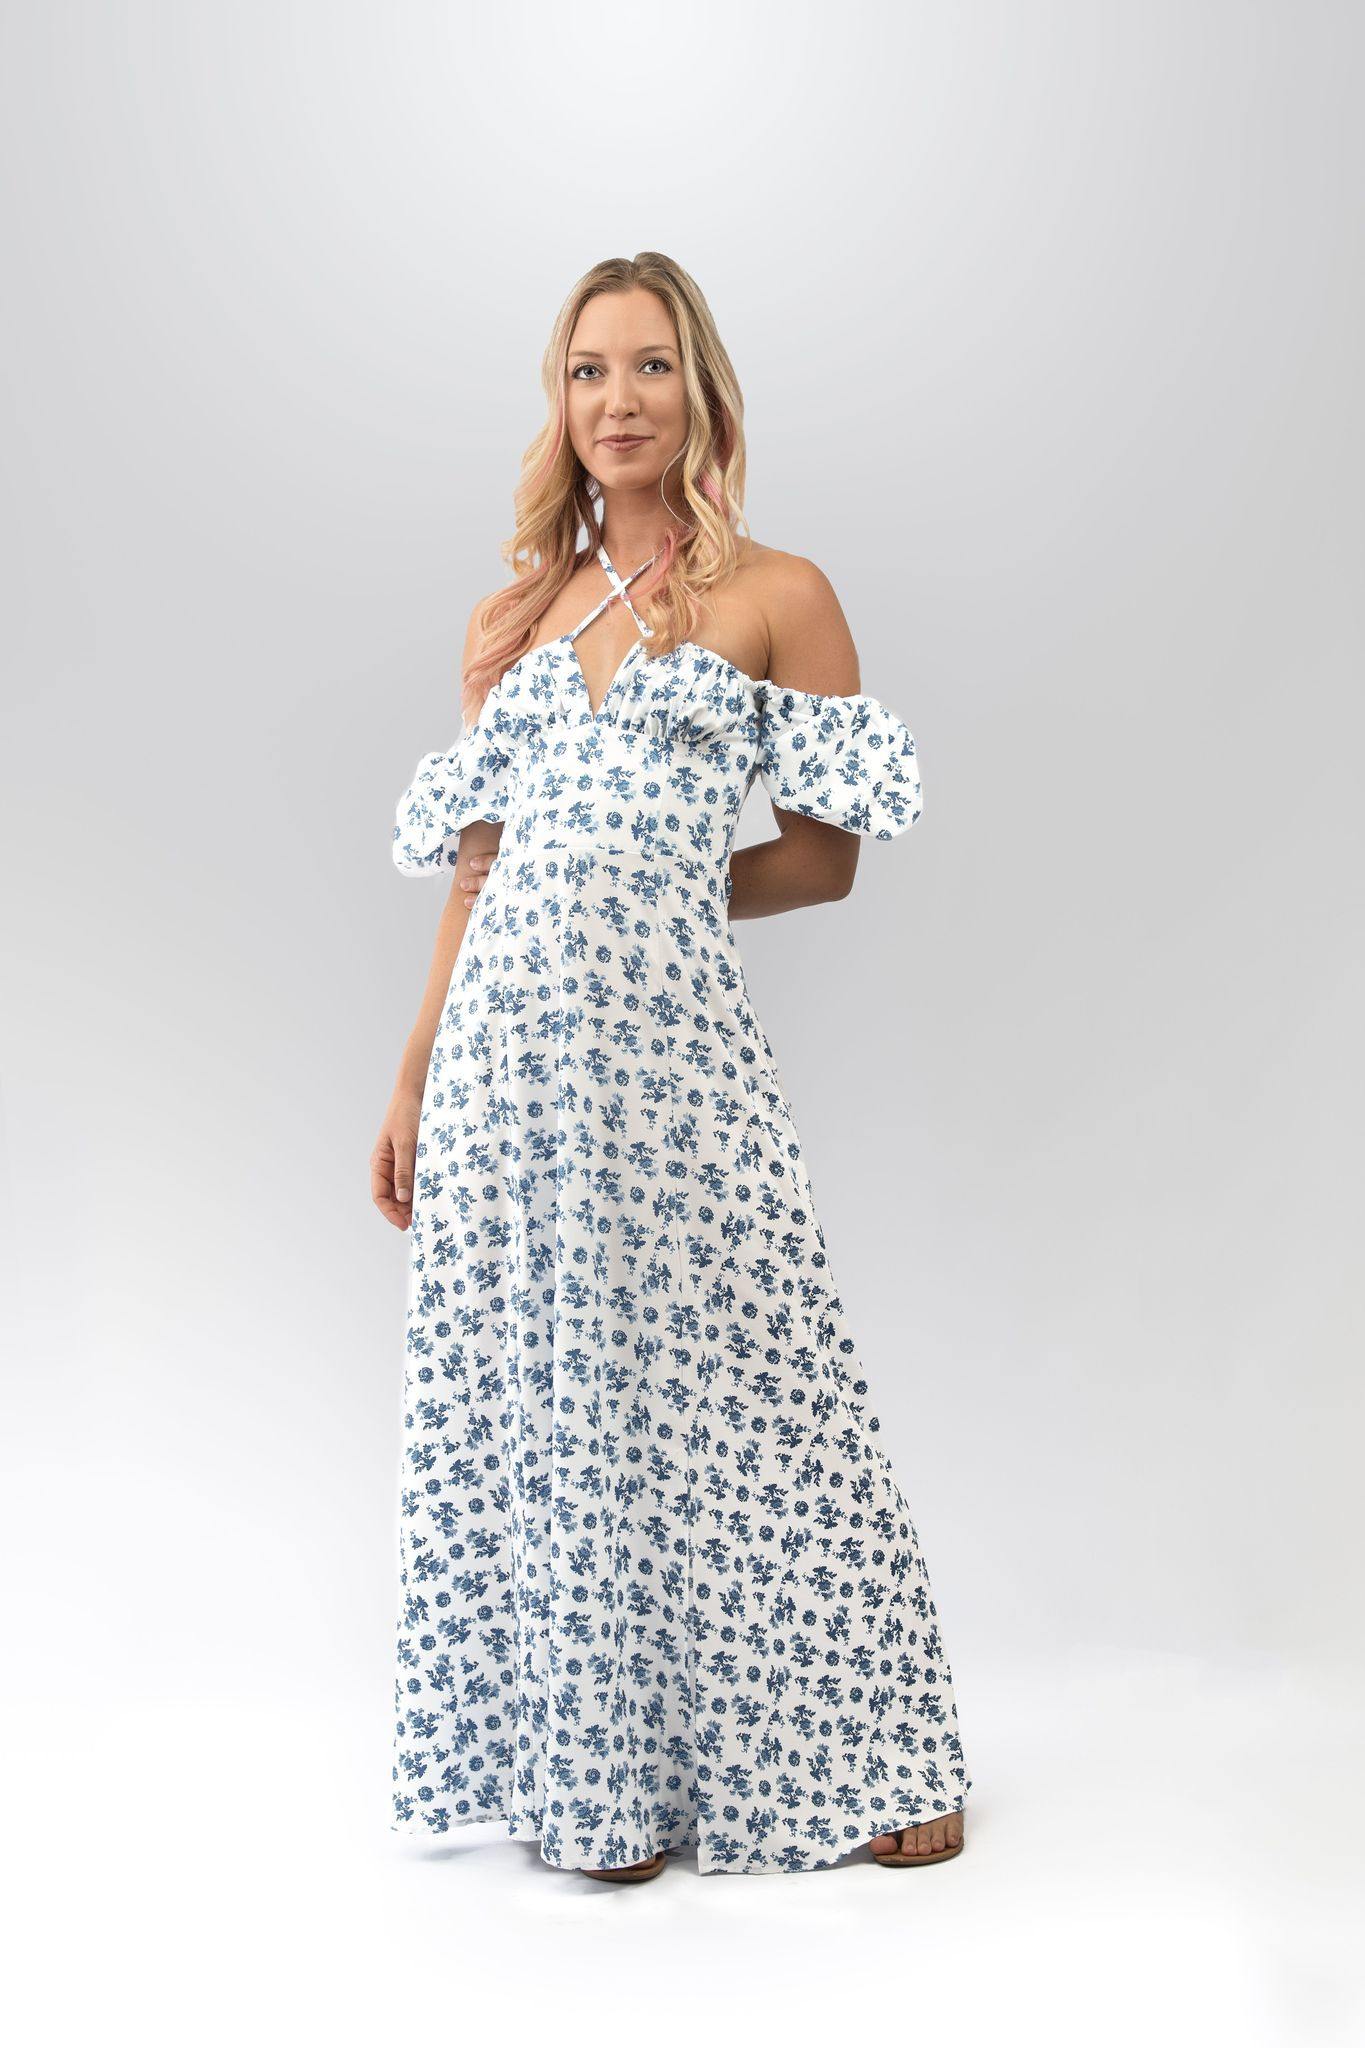 Floral Milkmaid Maxi Dress in White and Blue - watts that trend